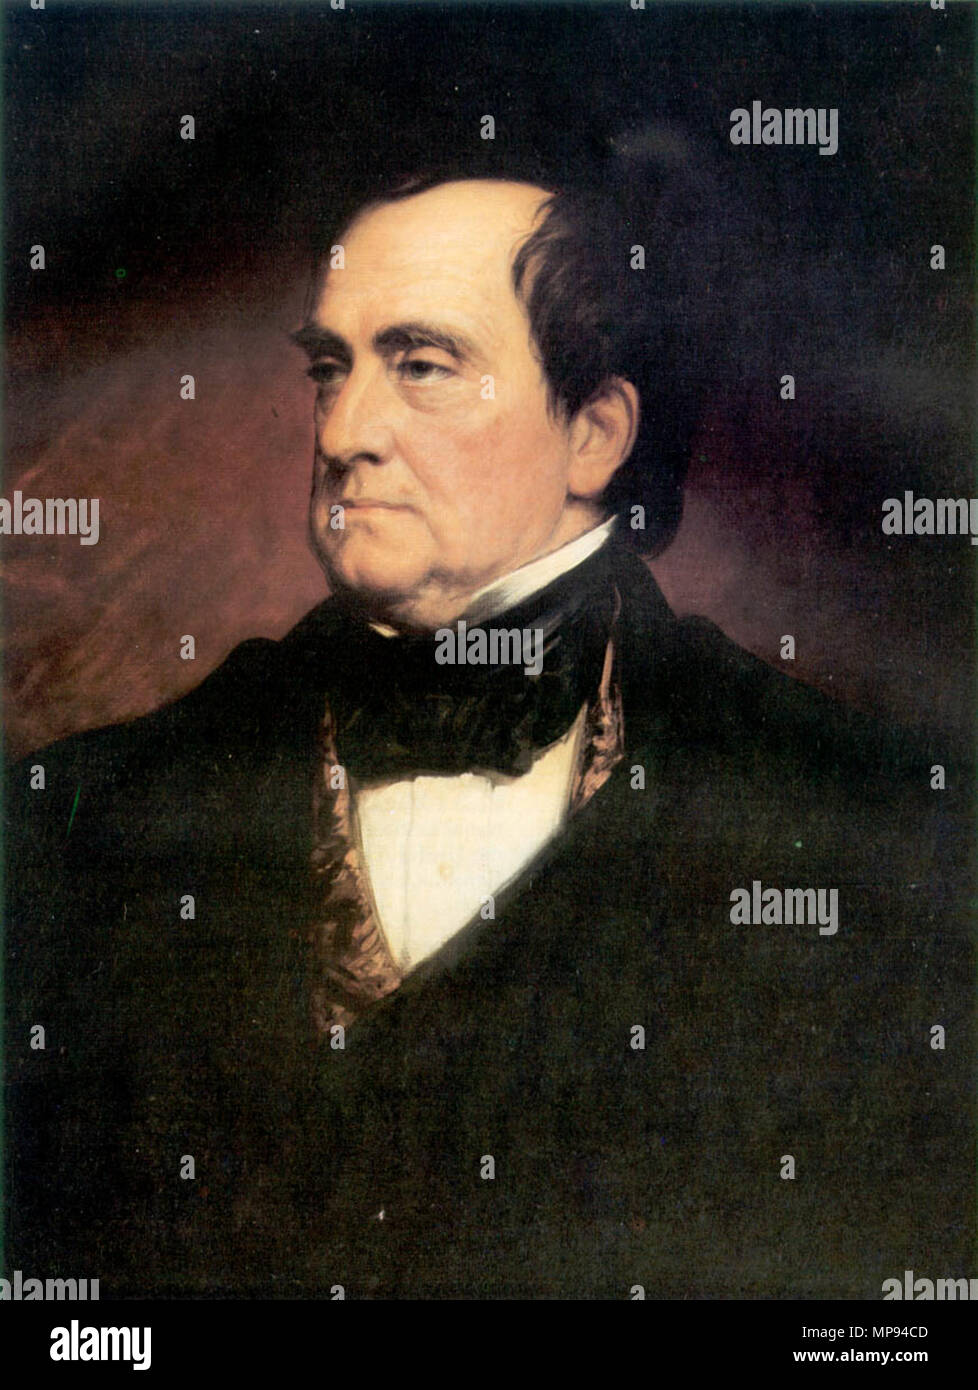 . Lewis Cass, 14th United States Secretary of War. Oil on canvas, 29½' x 24½', 1873.   Daniel Huntington  (1816–1906)     Alternative names Daniel P. Huntington; dan. huntington  Description American artist and painter  Date of birth/death October 4, 1816 April 19, 1906  Location of birth/death New York City New York City  Authority control  : Q323987 VIAF: 23216629 ISNI: 0000 0000 6681 0816 ULAN: 500017937 LCCN: nr91002048 GND: 129355194 WorldCat 808 Lewis Cass, 14th United States Secretary of War Stock Photo